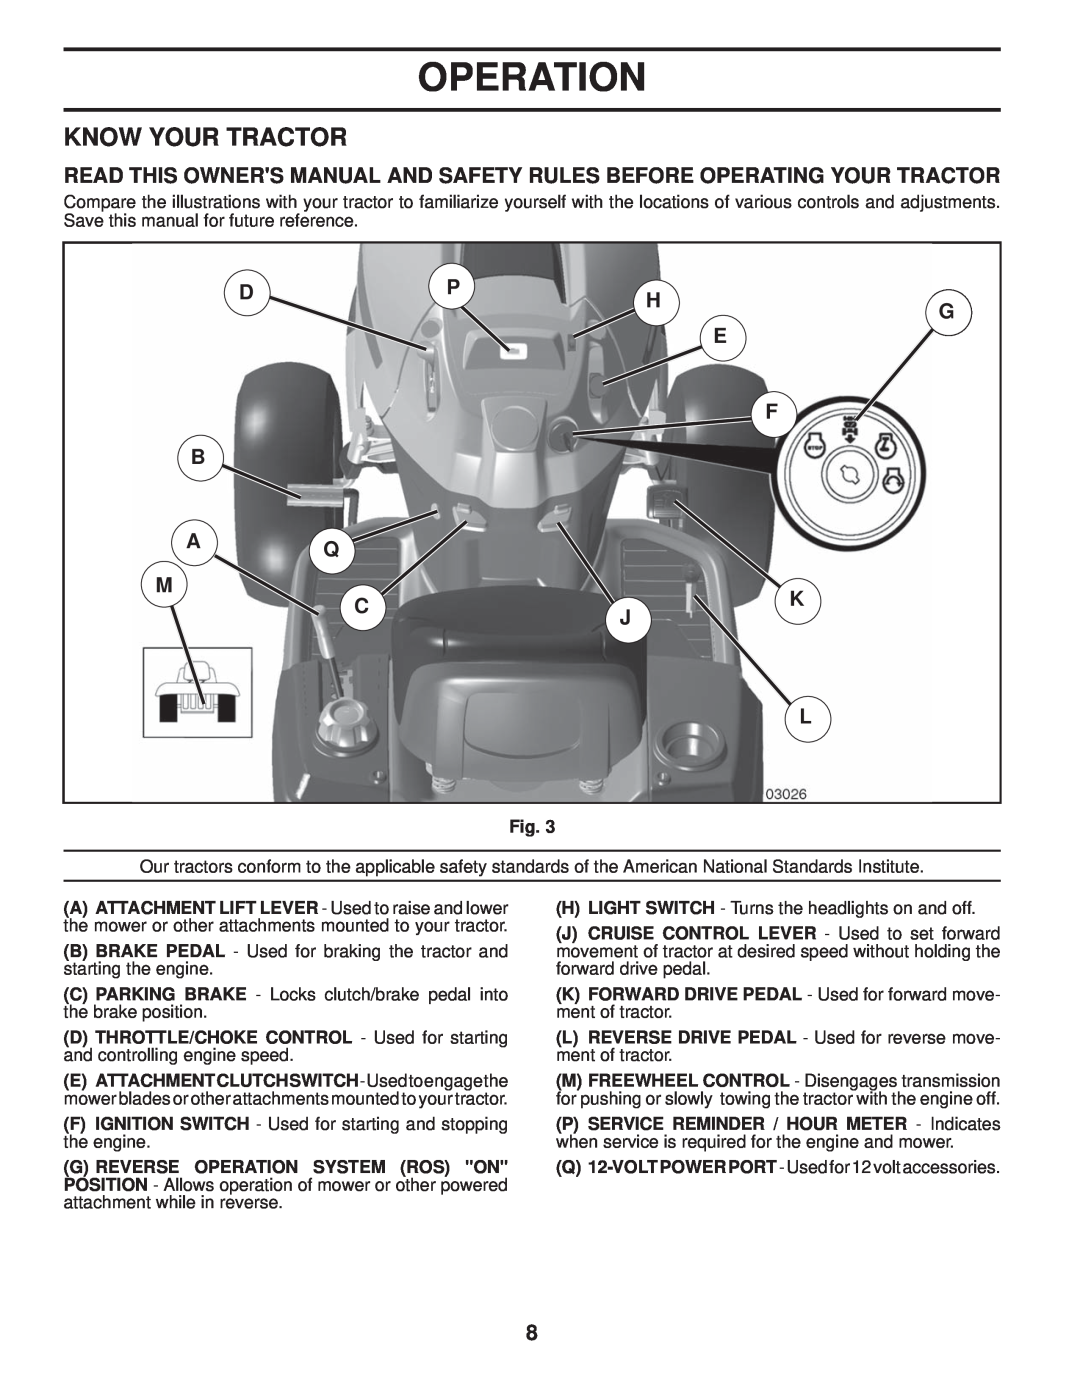 Husqvarna YTH2648 TF owner manual Know Your Tractor, Dphg E F, Cjk L, Operation 